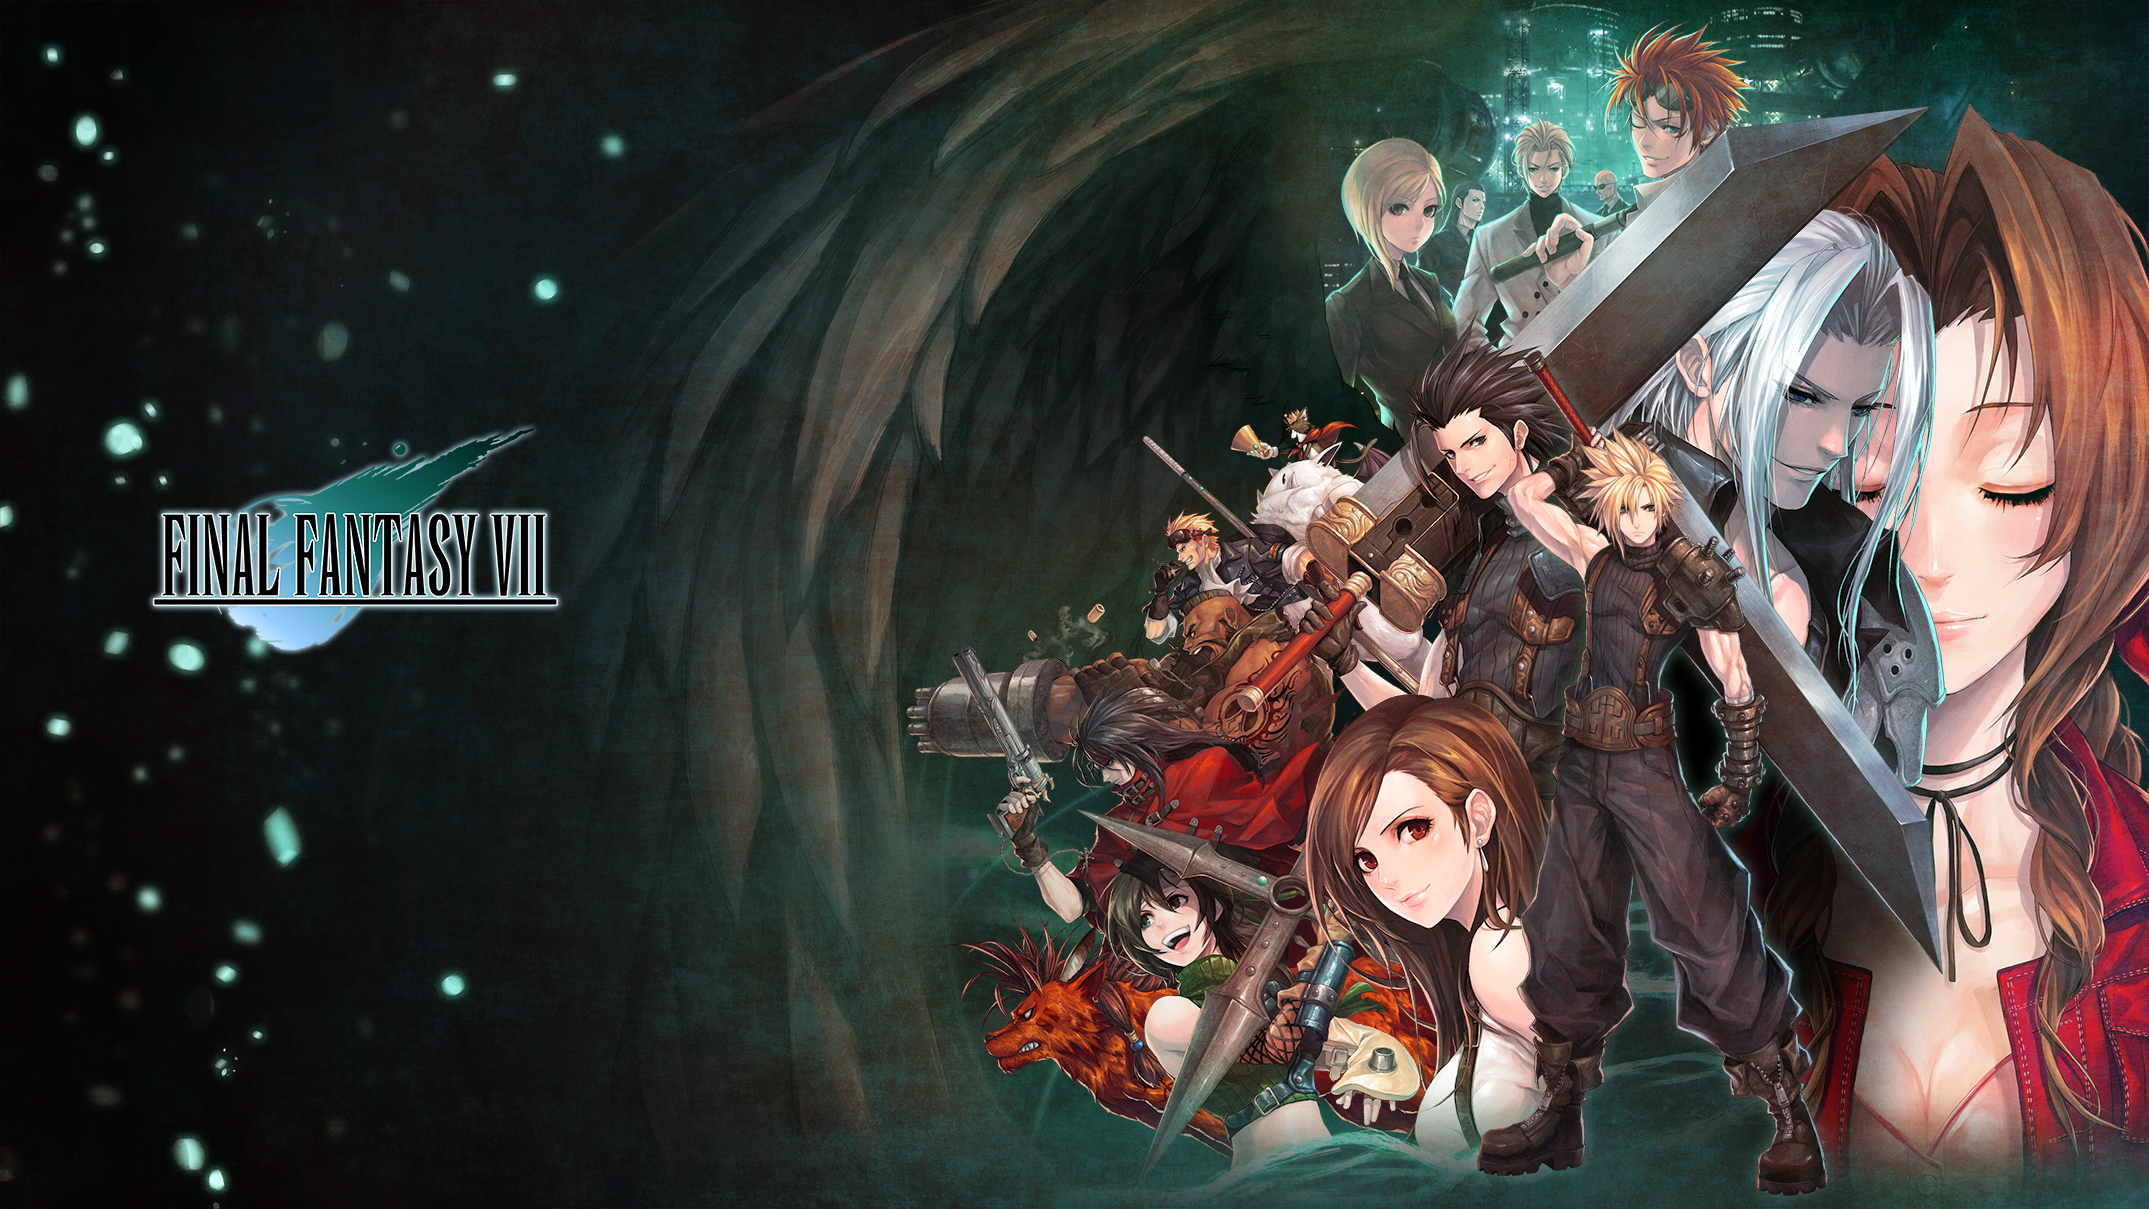 Free Download An Amazing Final Fantasy 7 Wallpaper By Evil Finalfantasy 2149x19 For Your Desktop Mobile Tablet Explore 77 Ff7 Wallpapers Ffxiii Wallpaper Ff7 Remake Wallpaper Awesome Ff7 Wallpaper